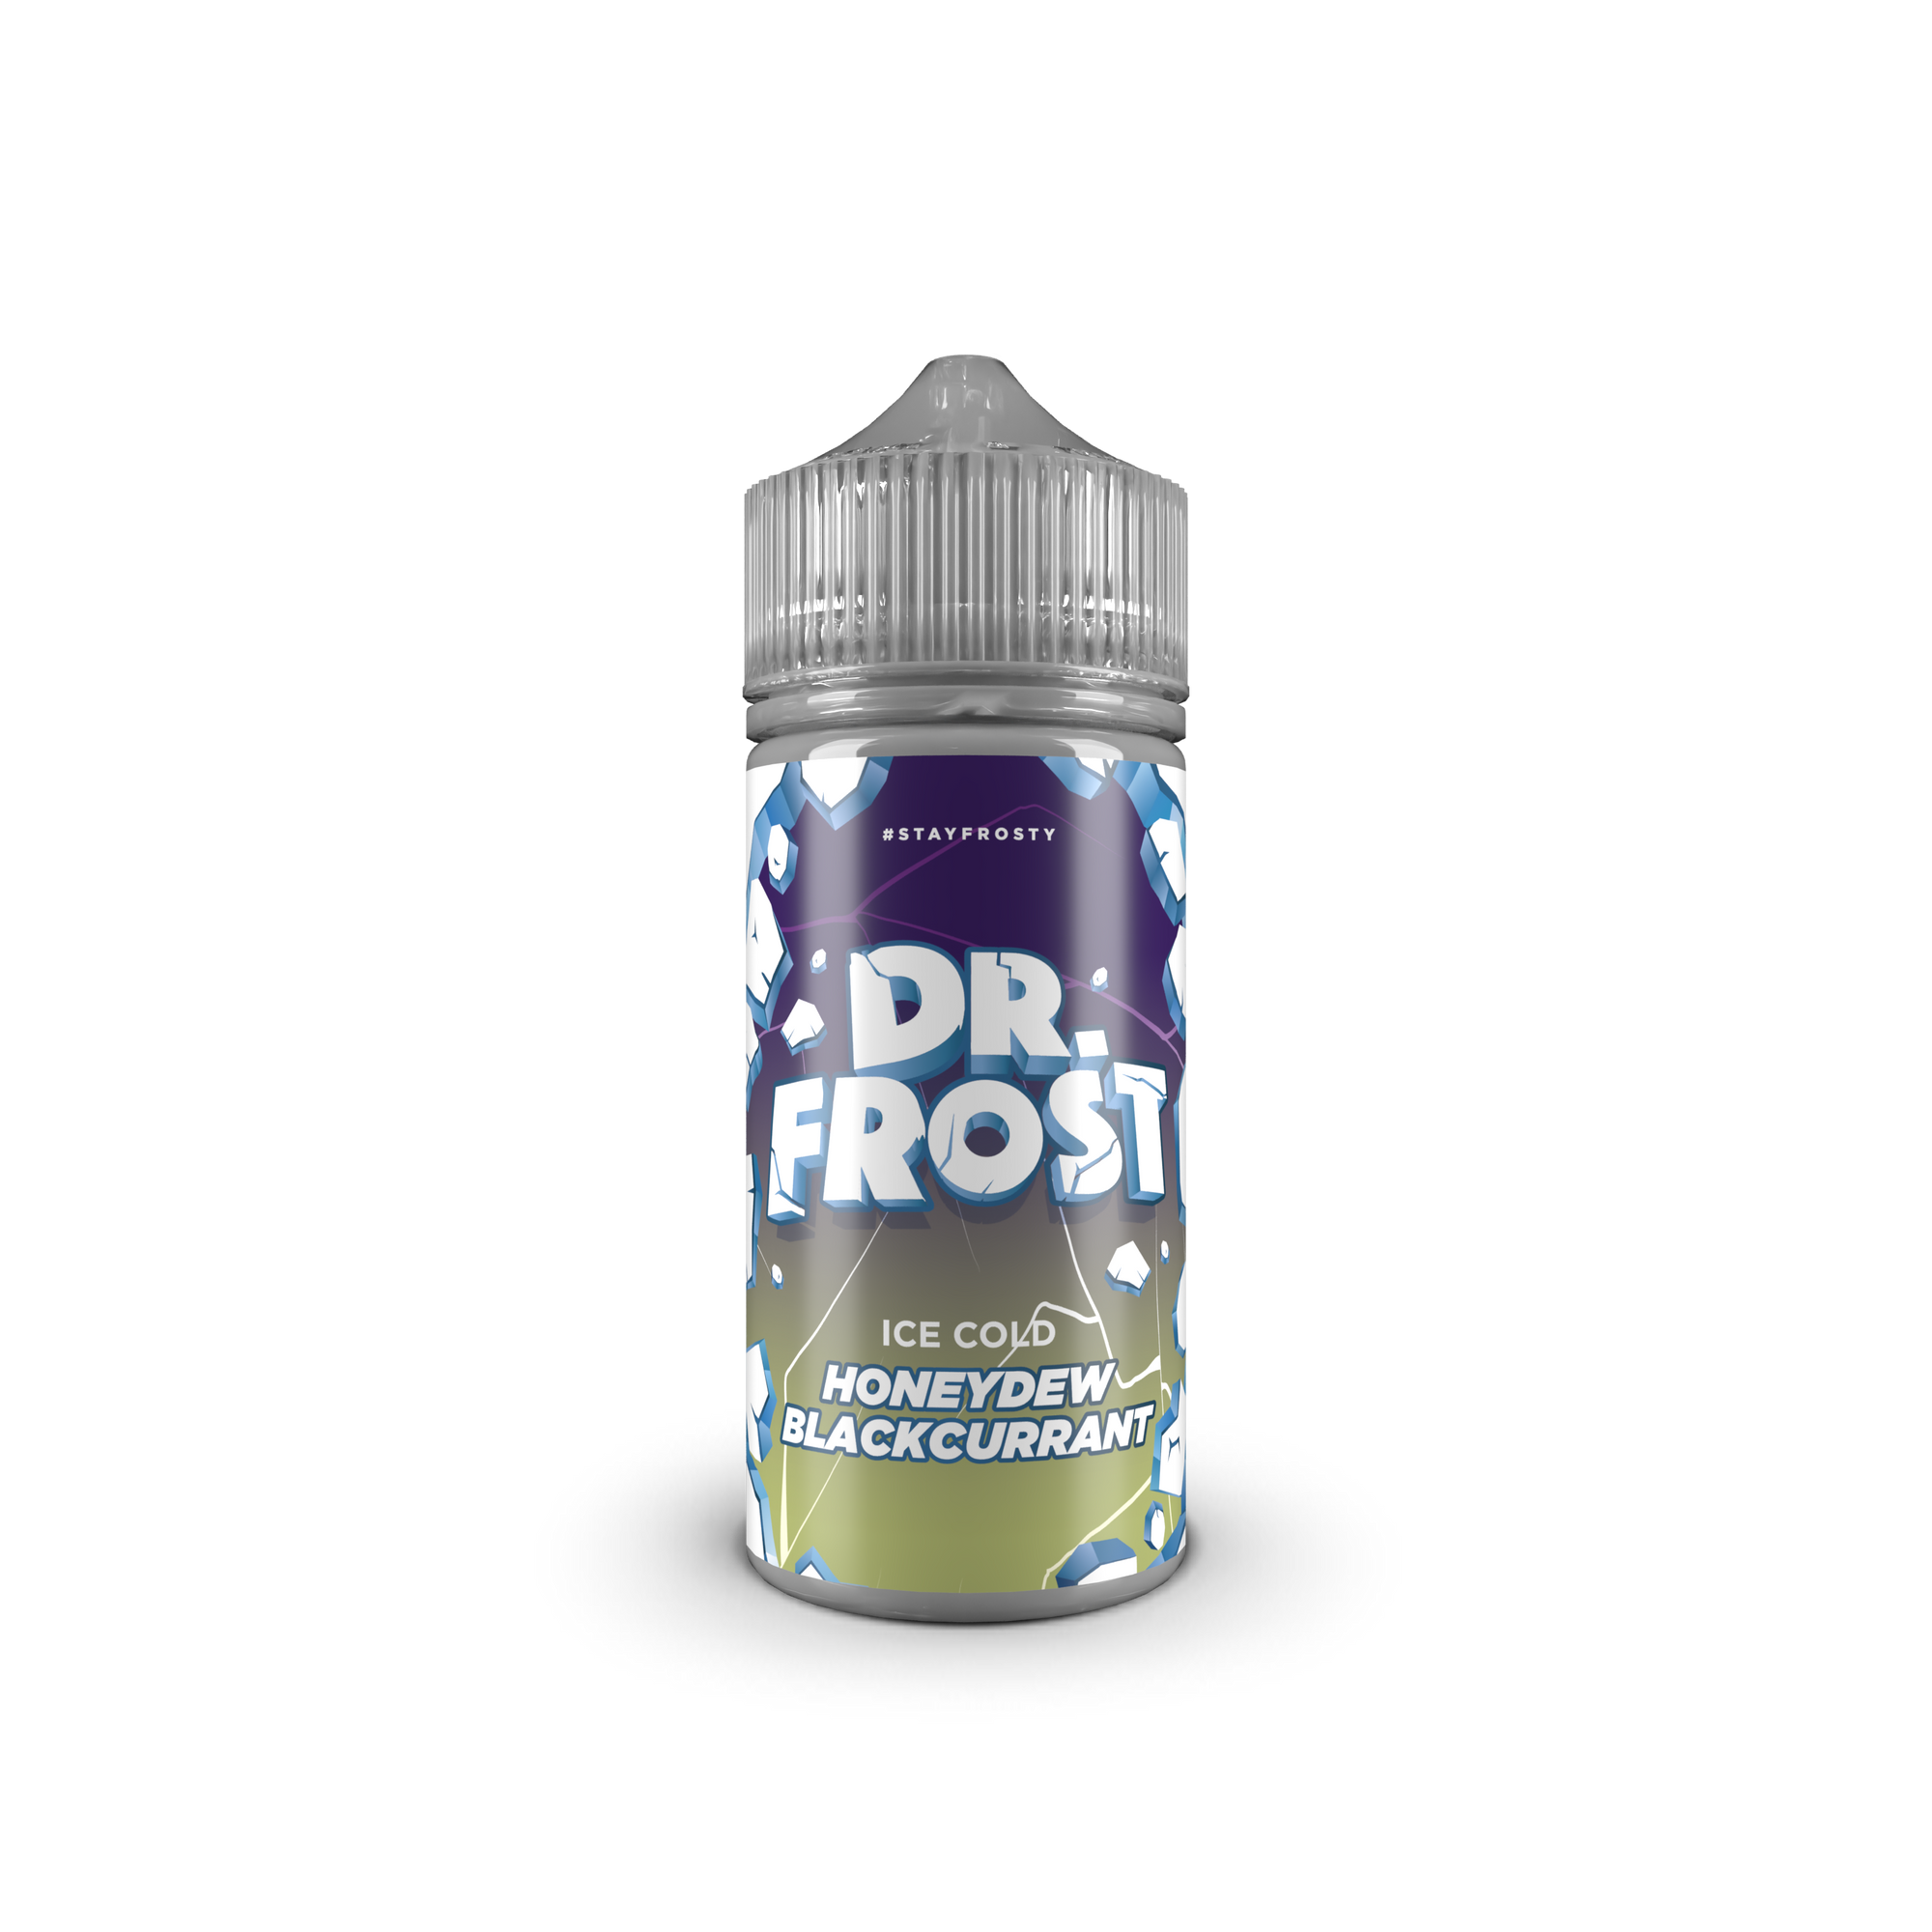 Buy Honeydew Blackcurrant Ice By Dr Frost - Wick and Wire Co Melbourne Vape Shop, Victoria Australia